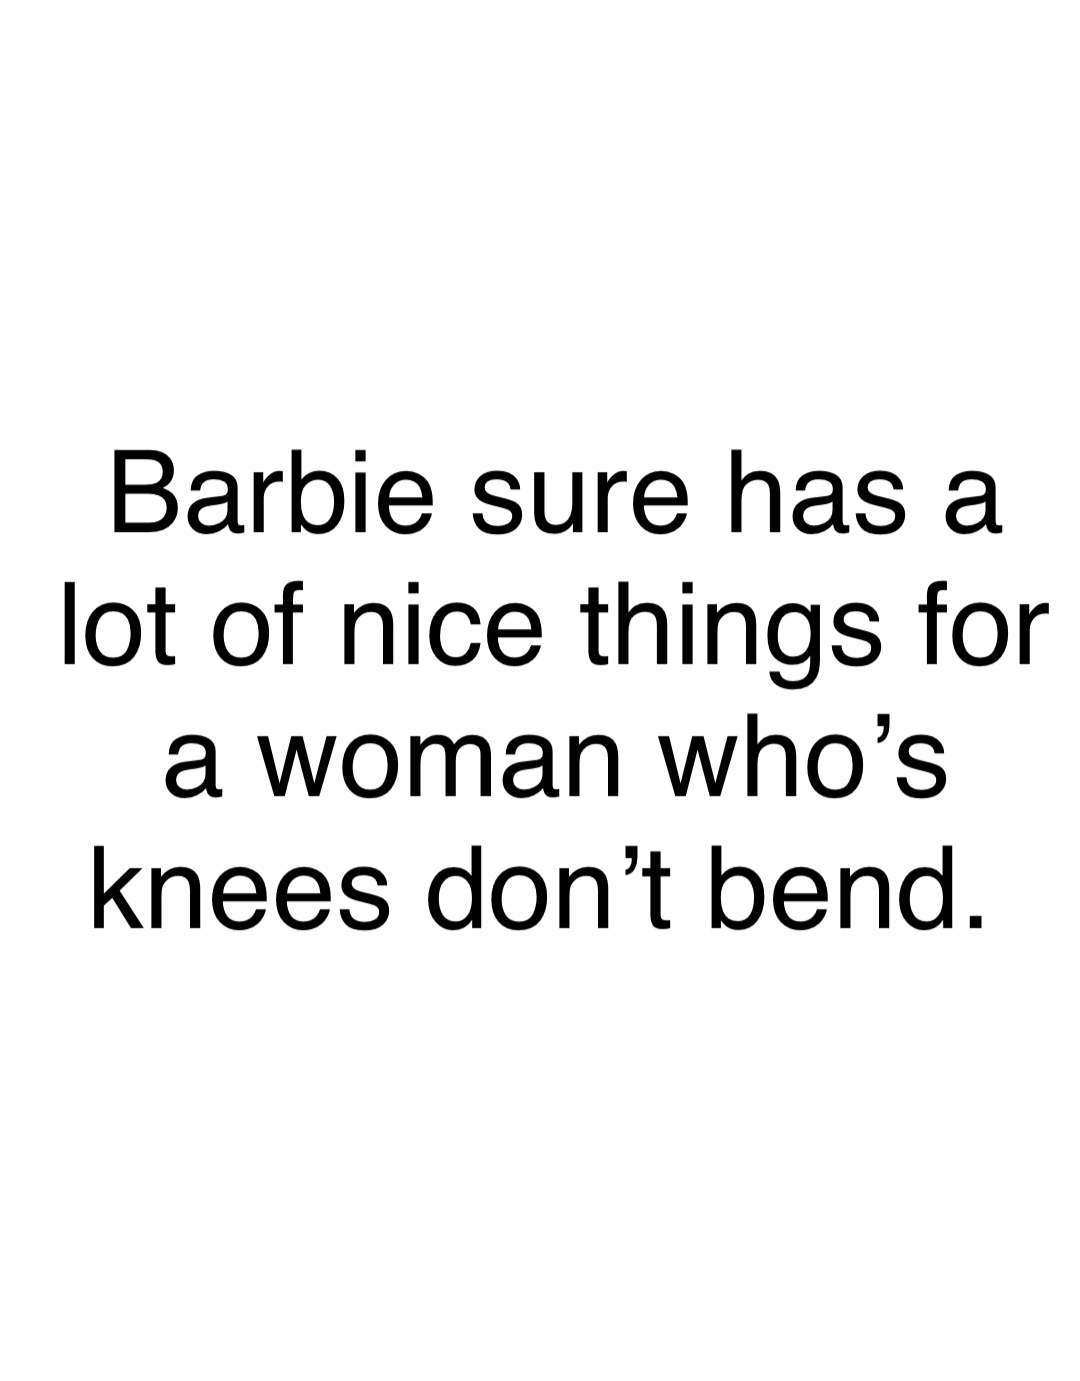 Barbie sure has a lot of nice things for a woman who’s knees don’t bend.